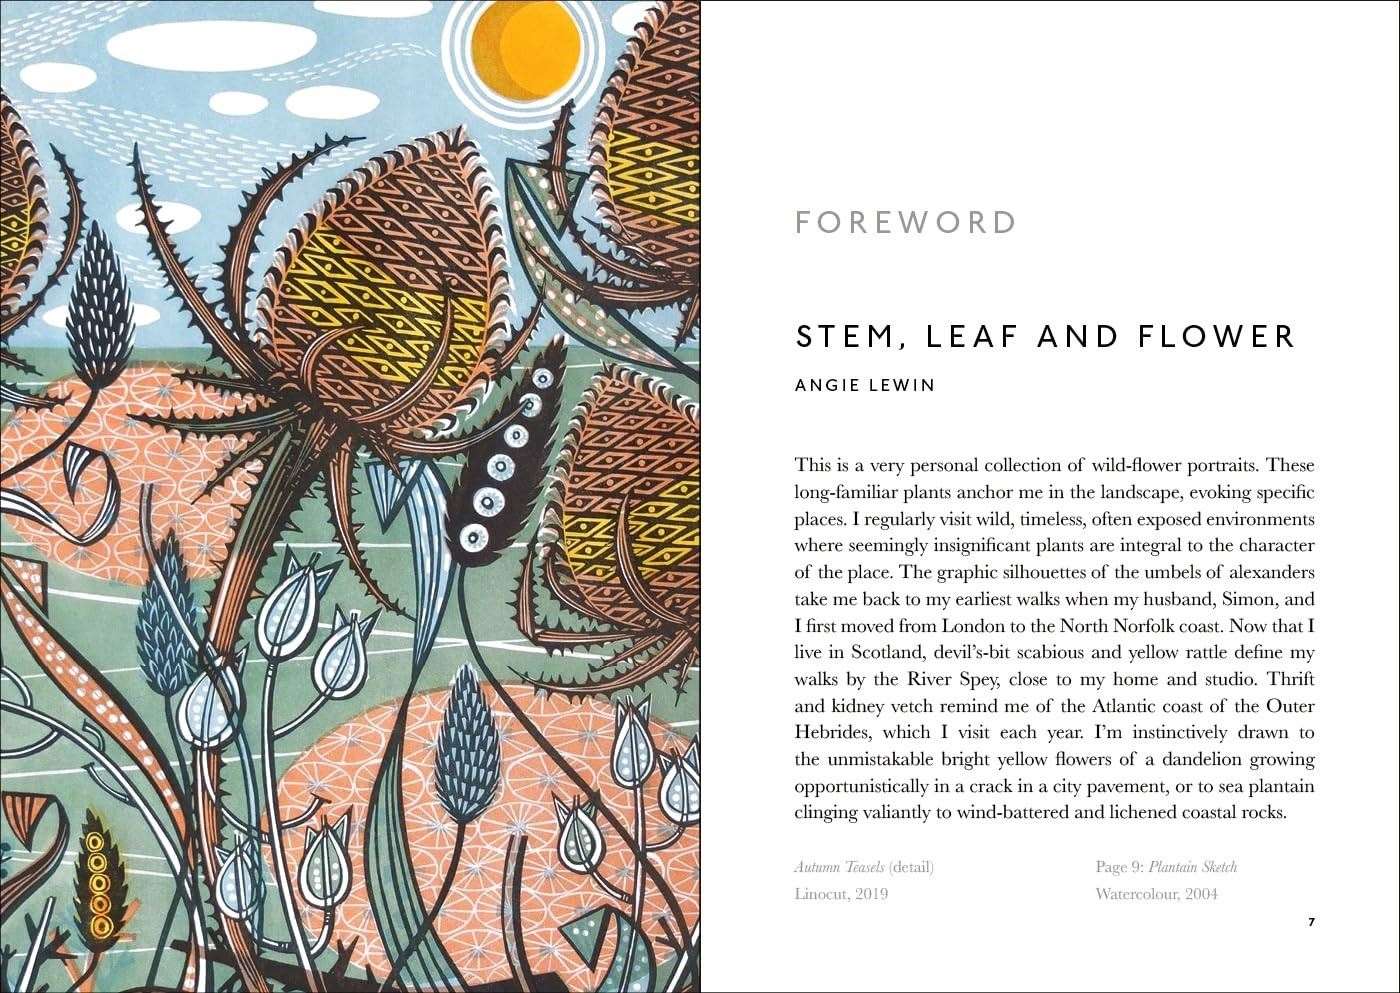 Page from The Book of Wild Flowers with an illustration by Angie Lewin.